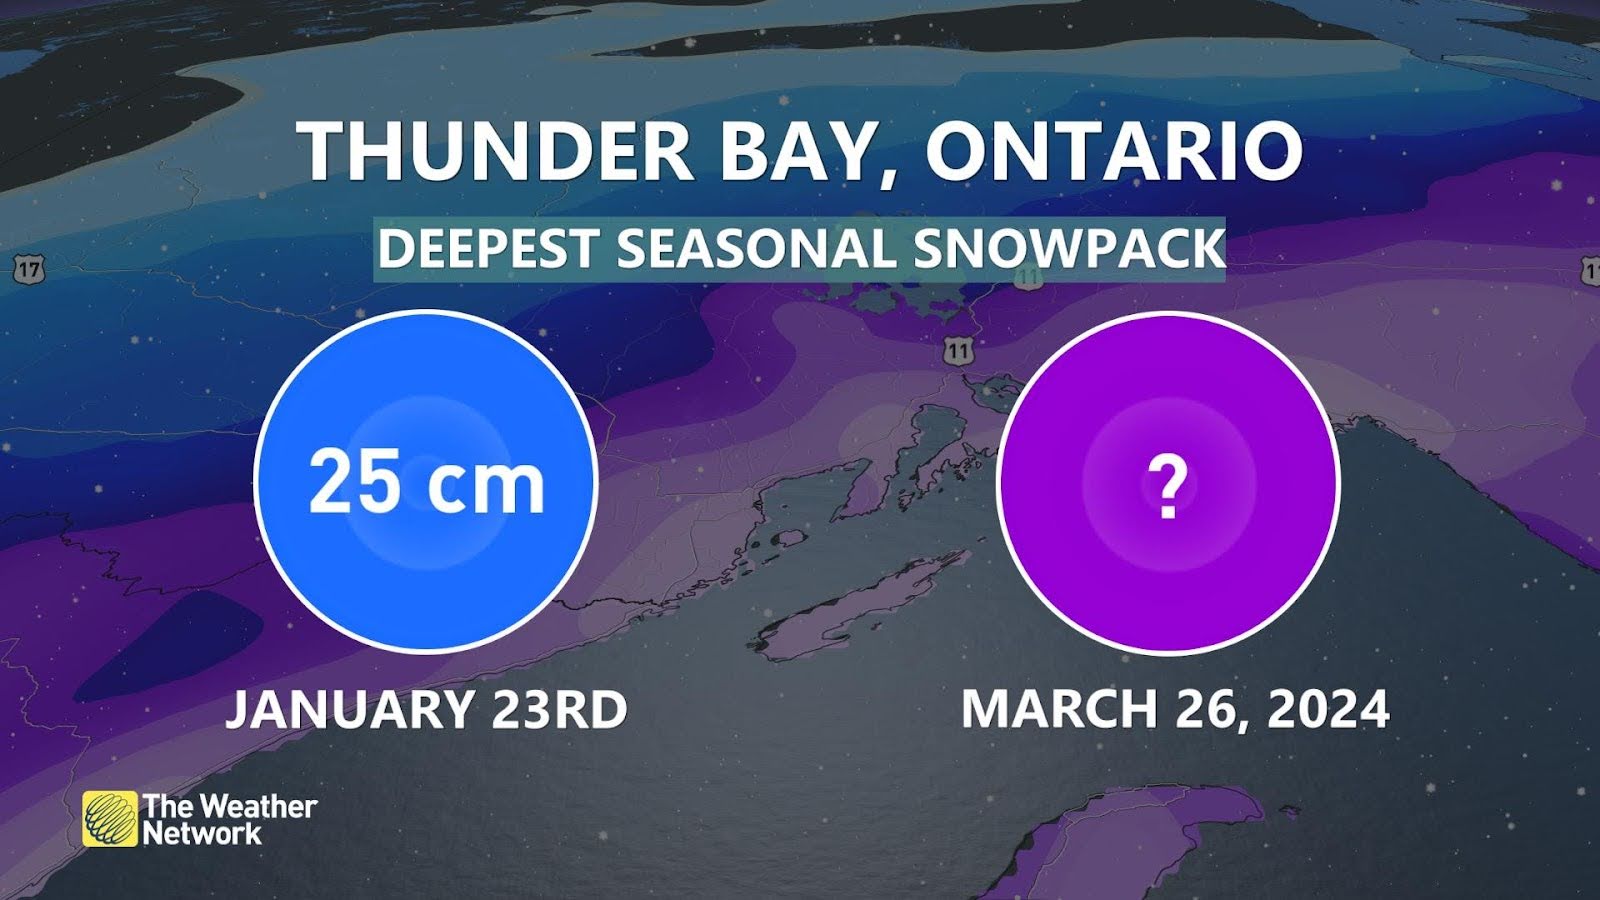 prolonged snowfall nears end in northwestern ontario, but travel still impacted